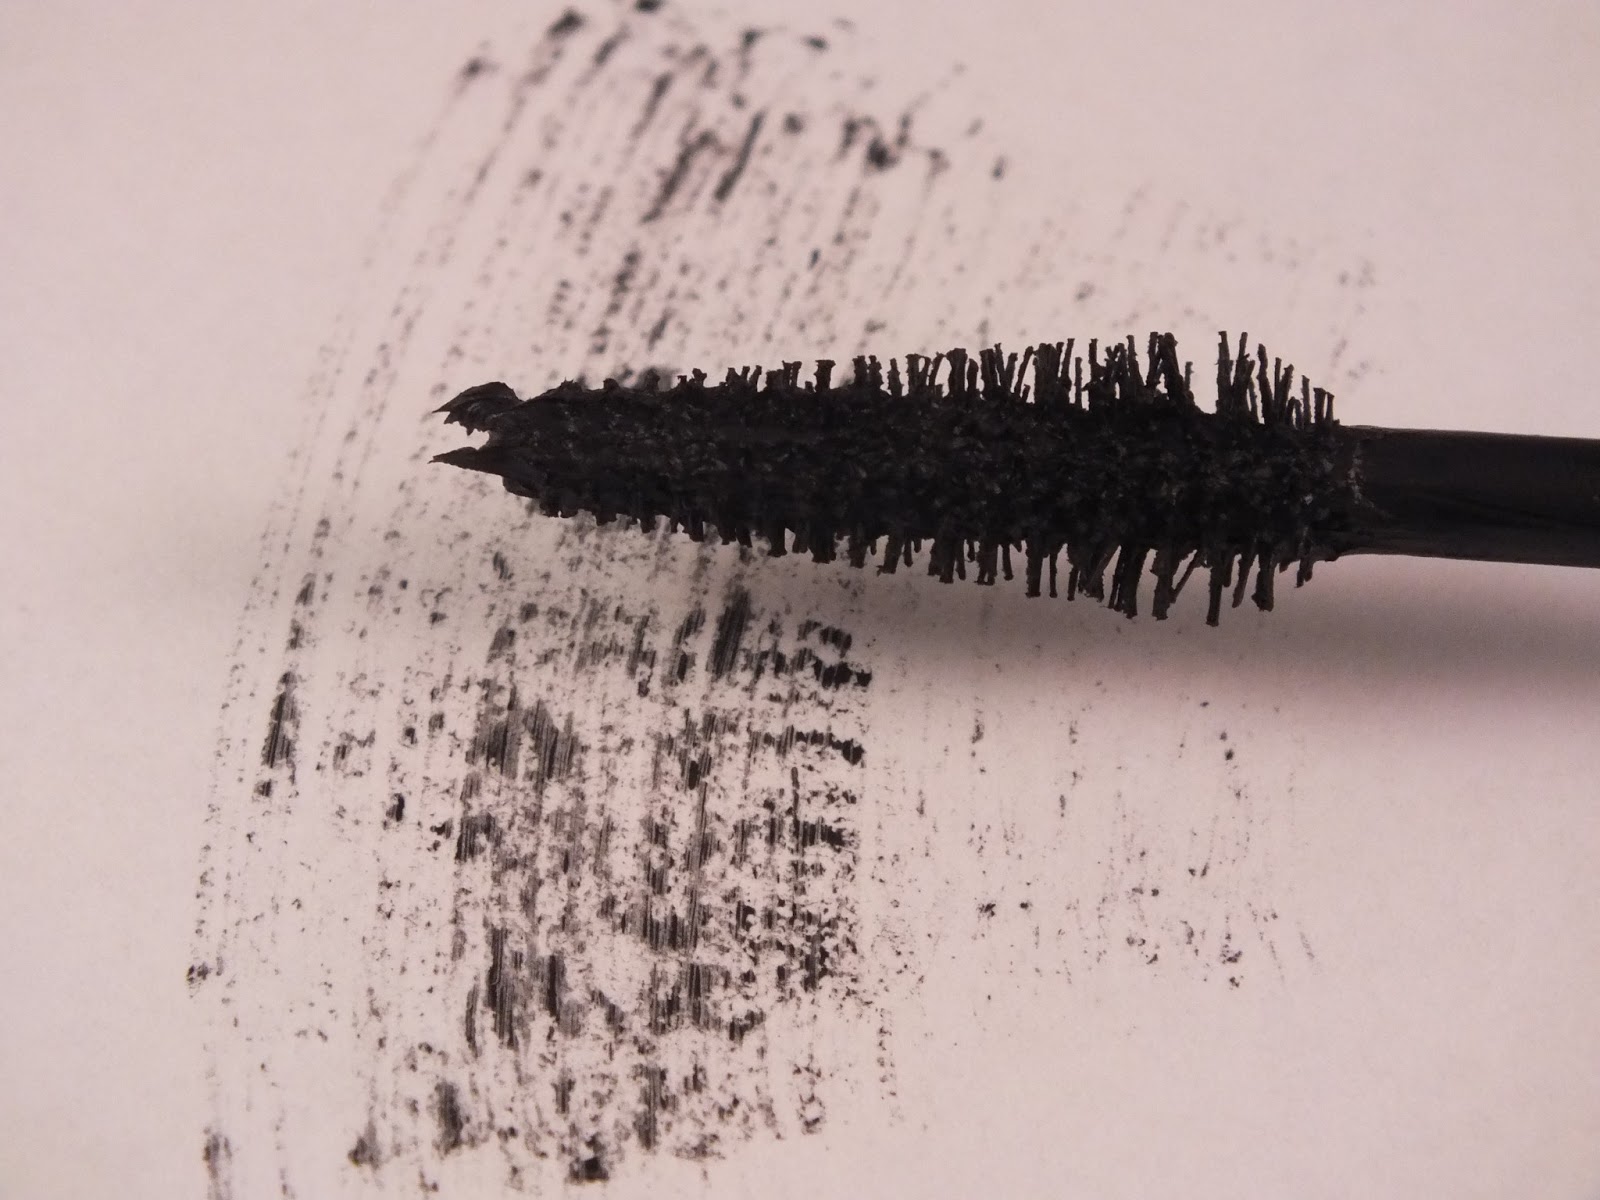 How To Fix Dry Mascara? A Comprehensive Guide To Follow